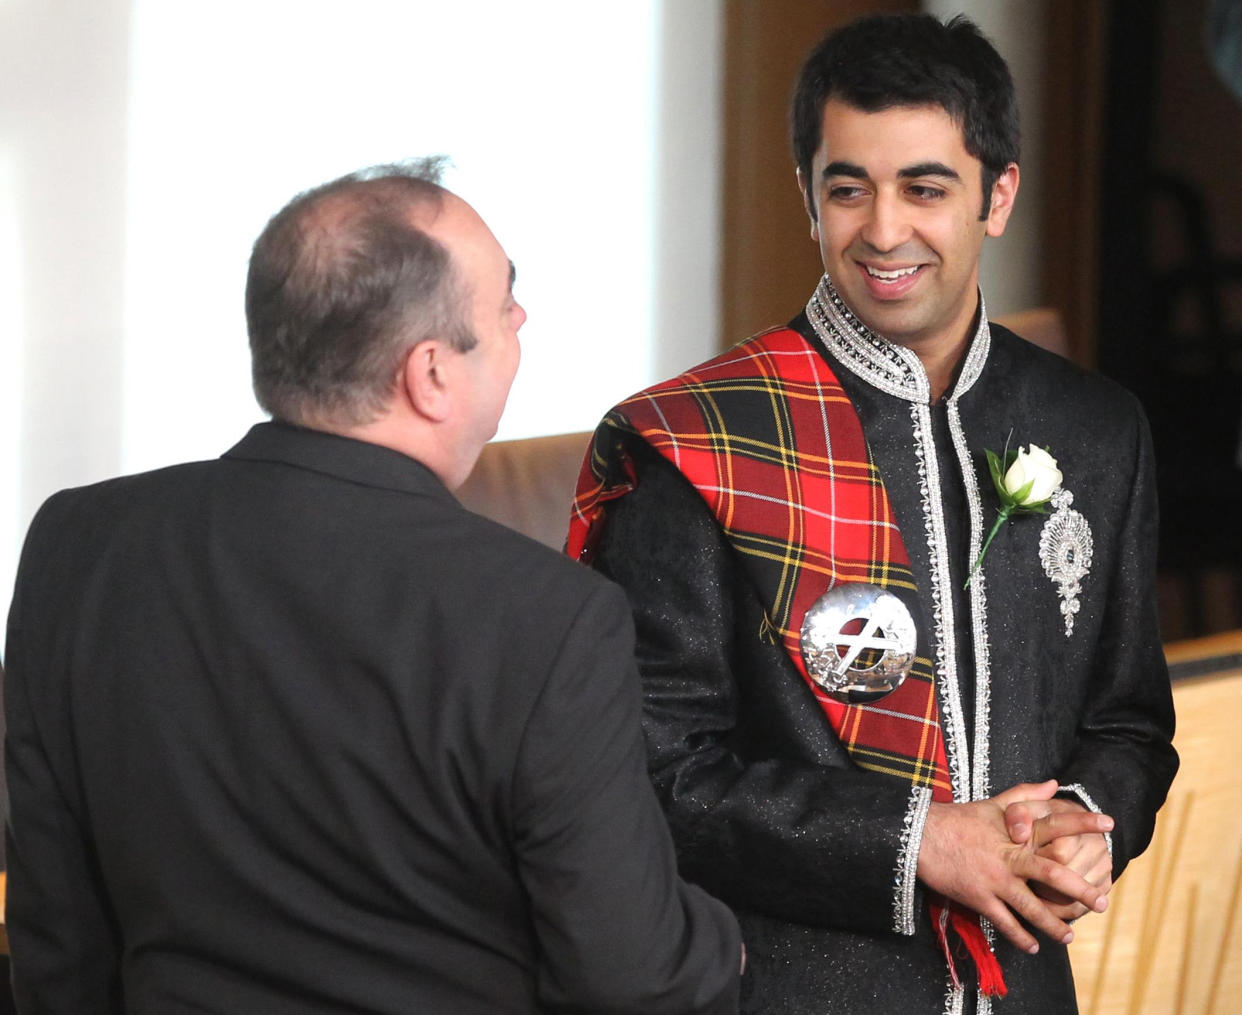 Humza Yousaf, pictured with former first minister Alex Salmond, became an MSP in 2011 (Andrew Milligan/PA)